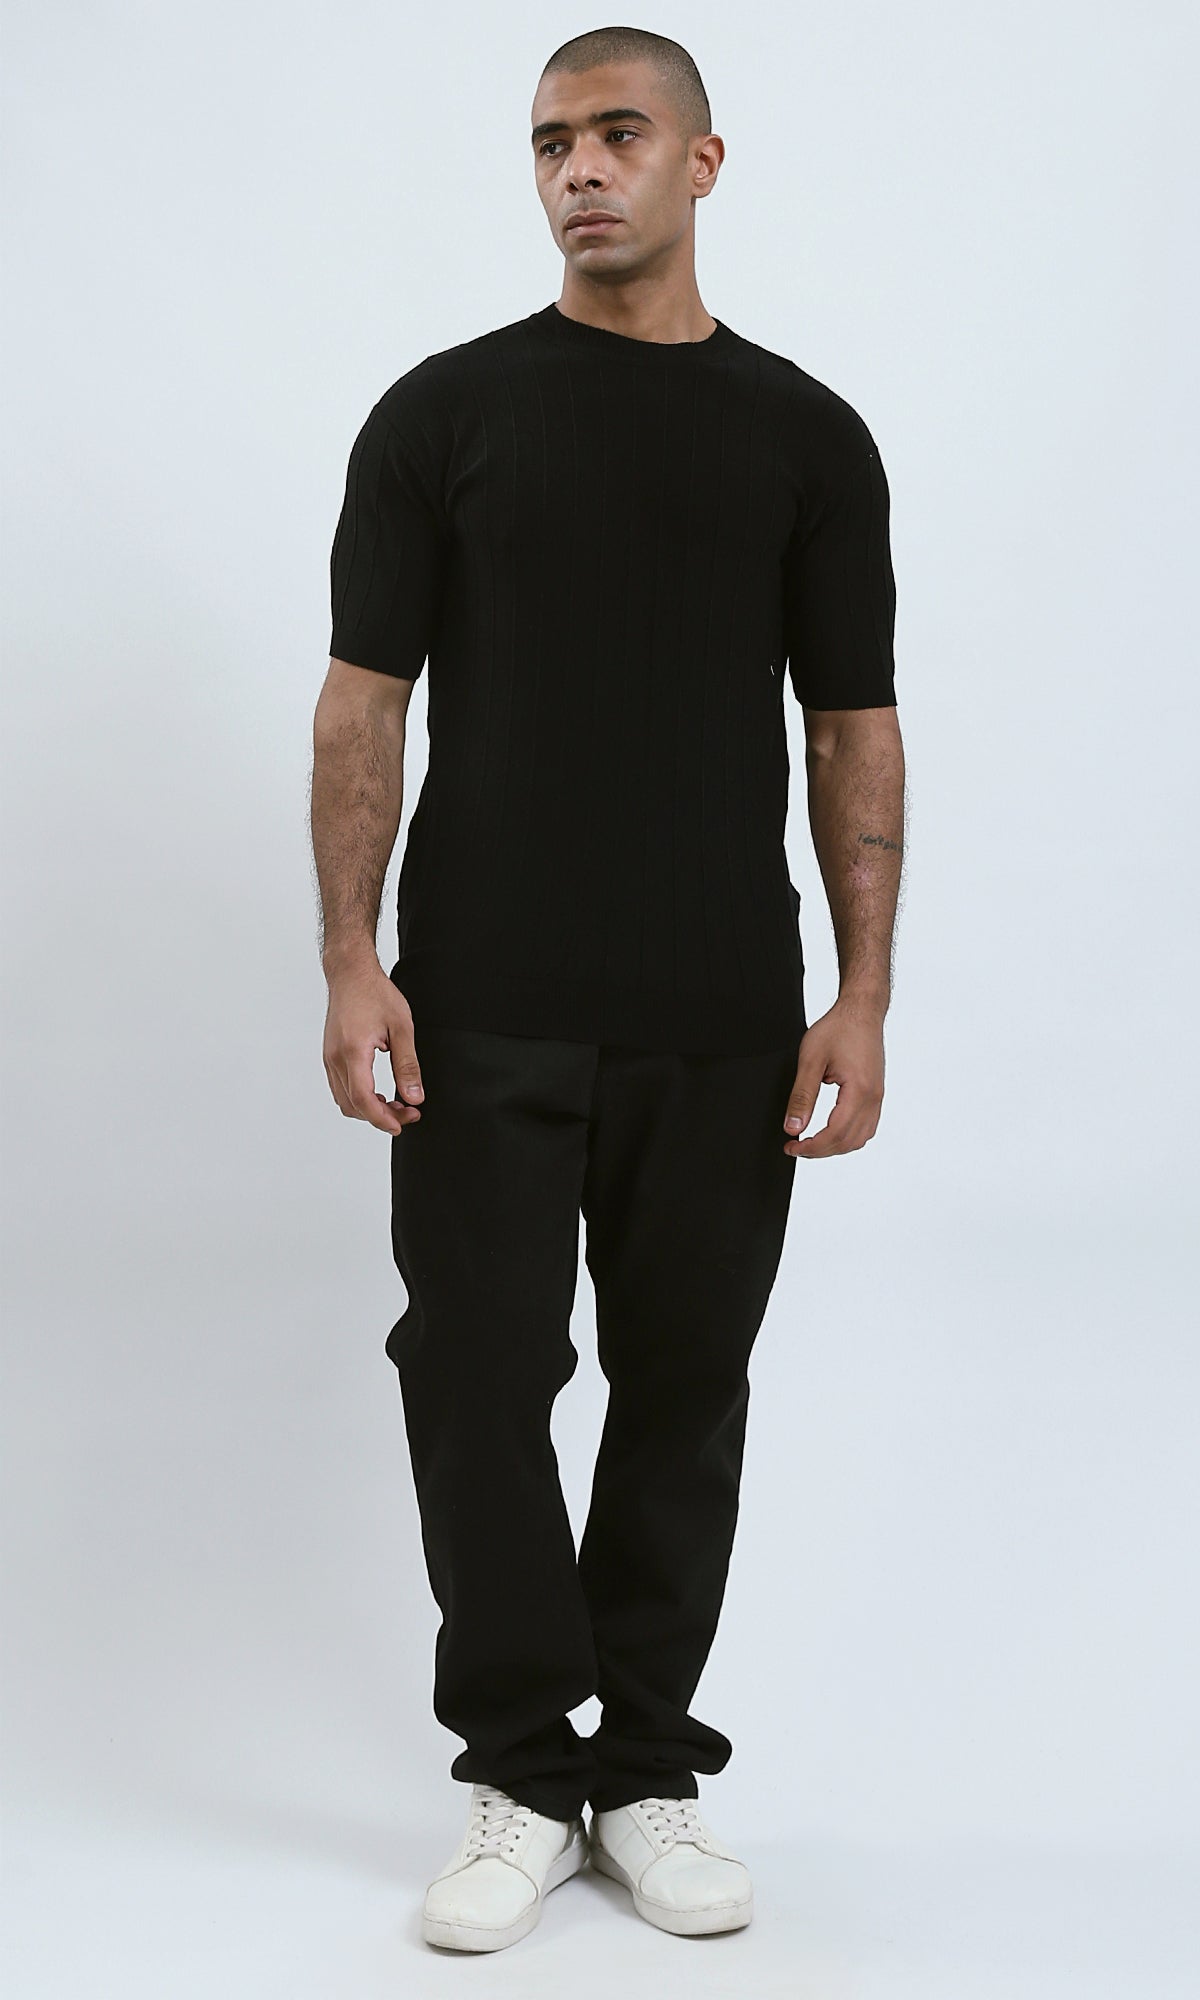 O182714 Kintted Relaxed Fit Slip On Black Tee